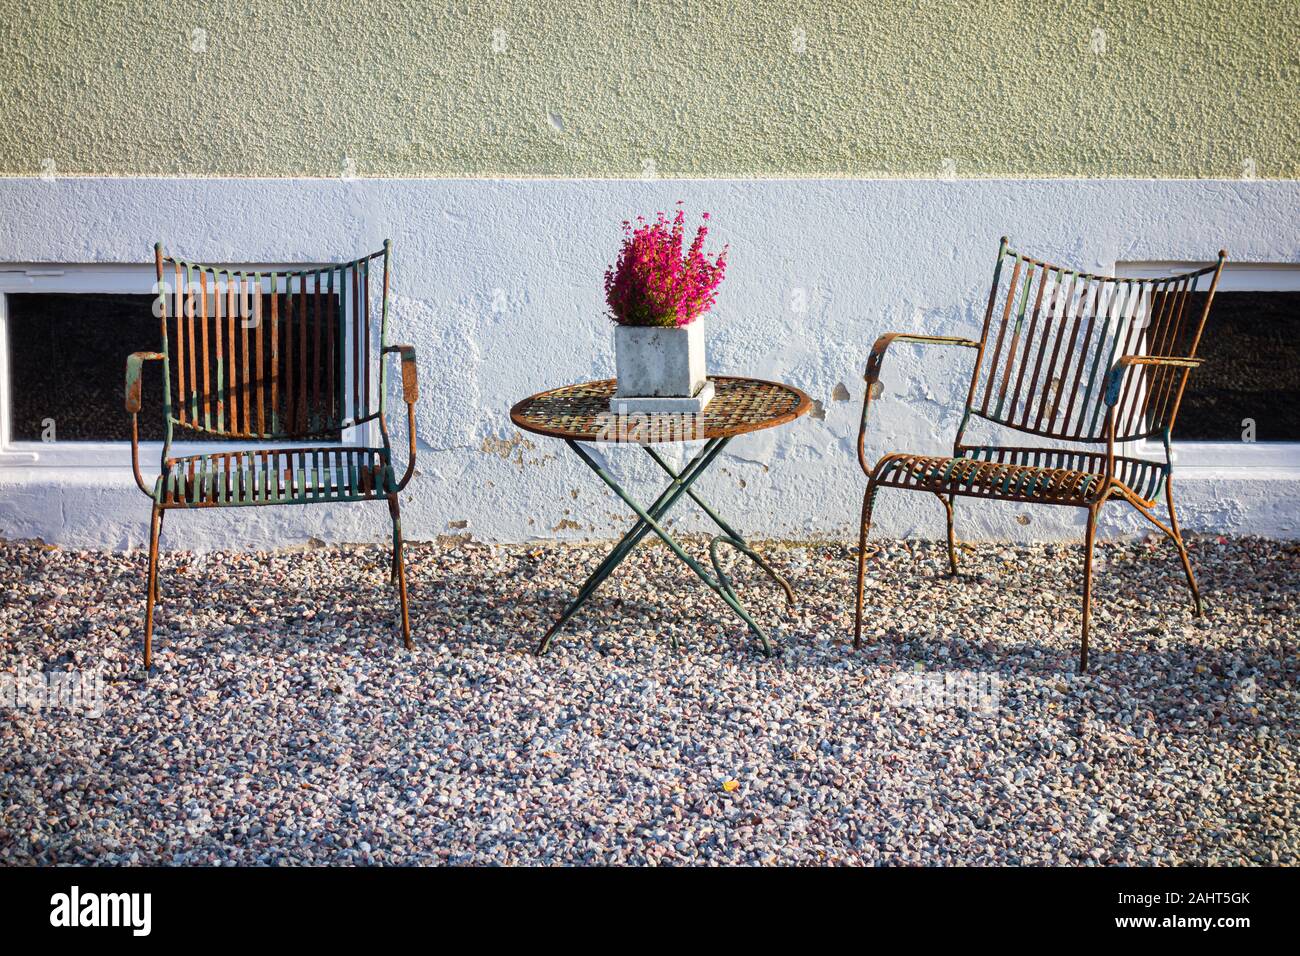 The outdoor furniture remains. Stock Photo